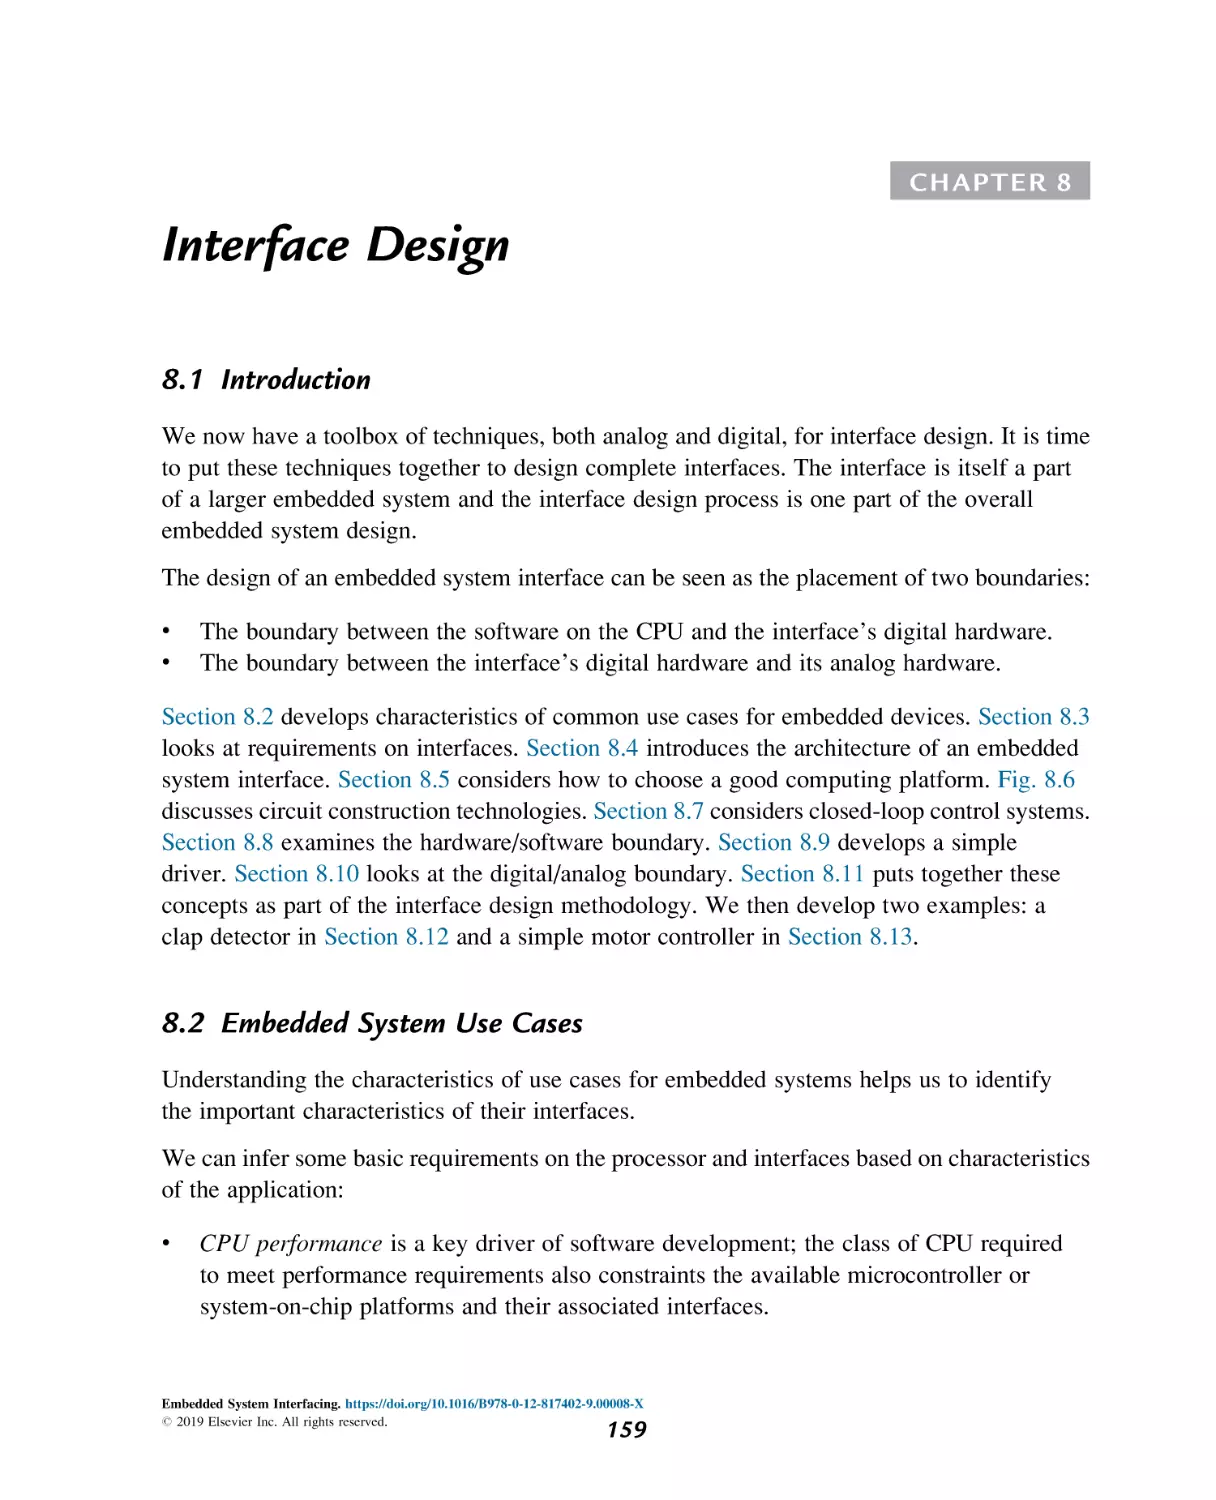 8
Interface Design
Introduction
Embedded System Use Cases